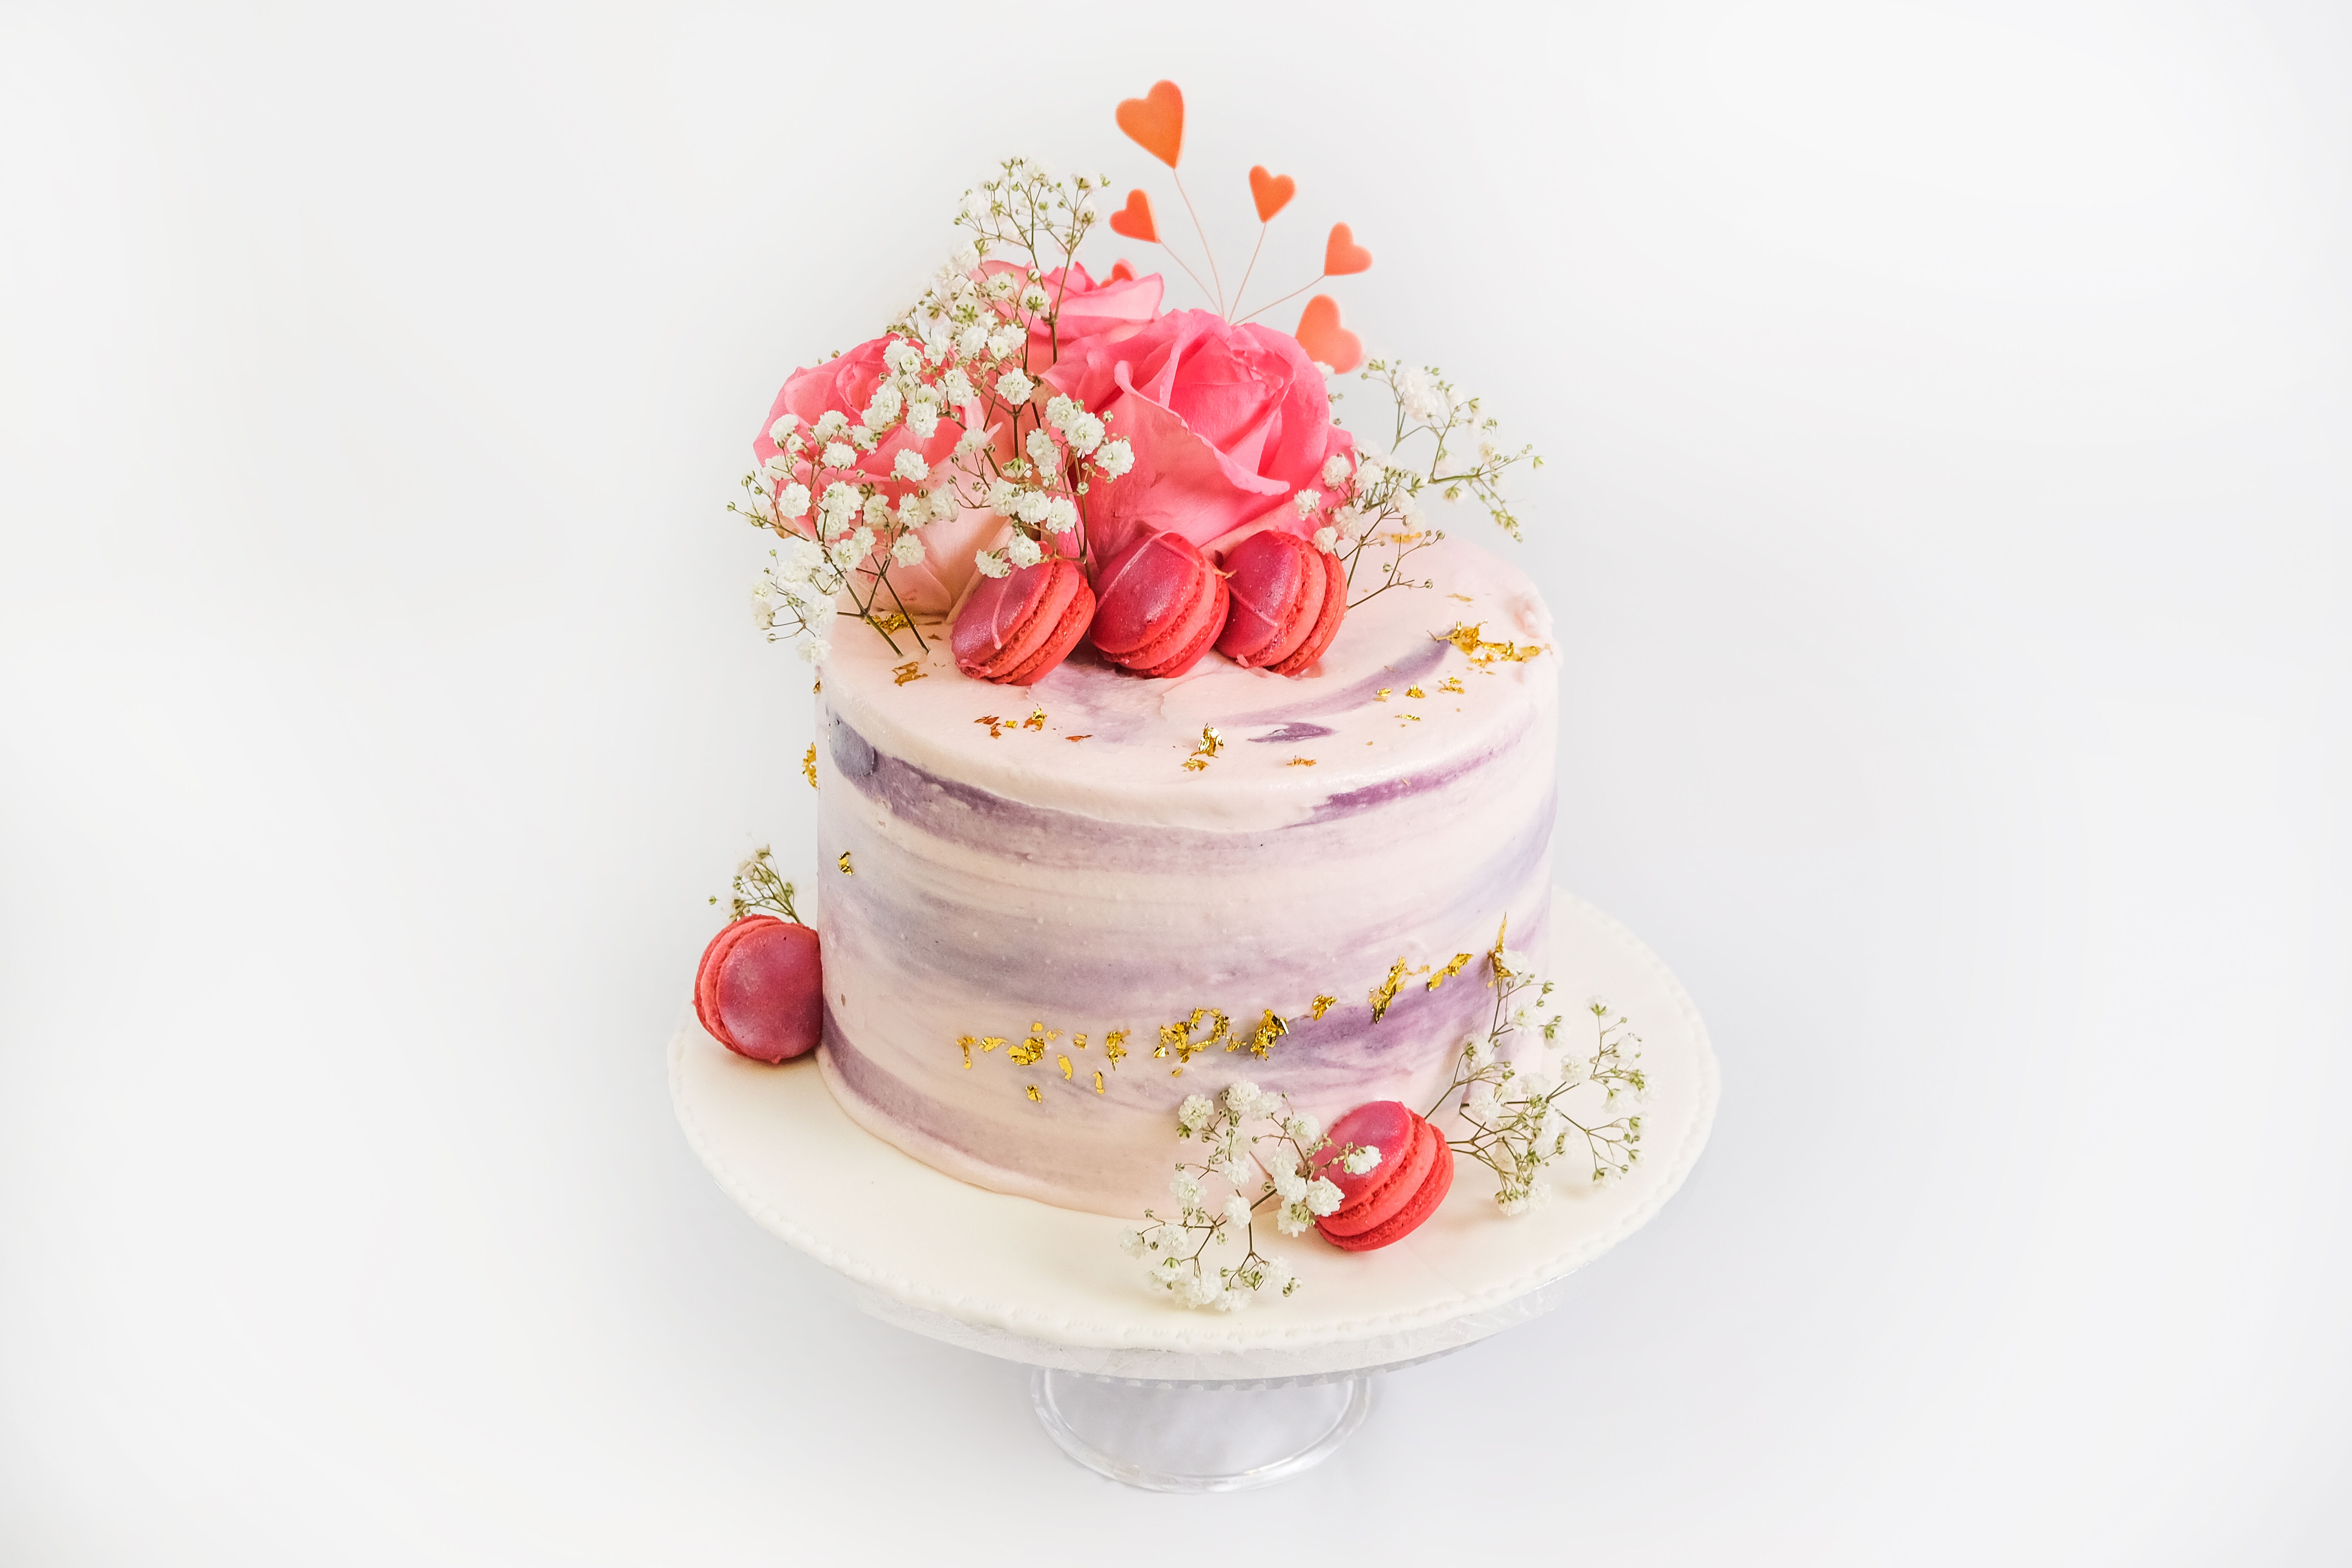 Flowers and Cake delivery in Burnaby BC by Adele Rae Florists –  Adeleraeflorist